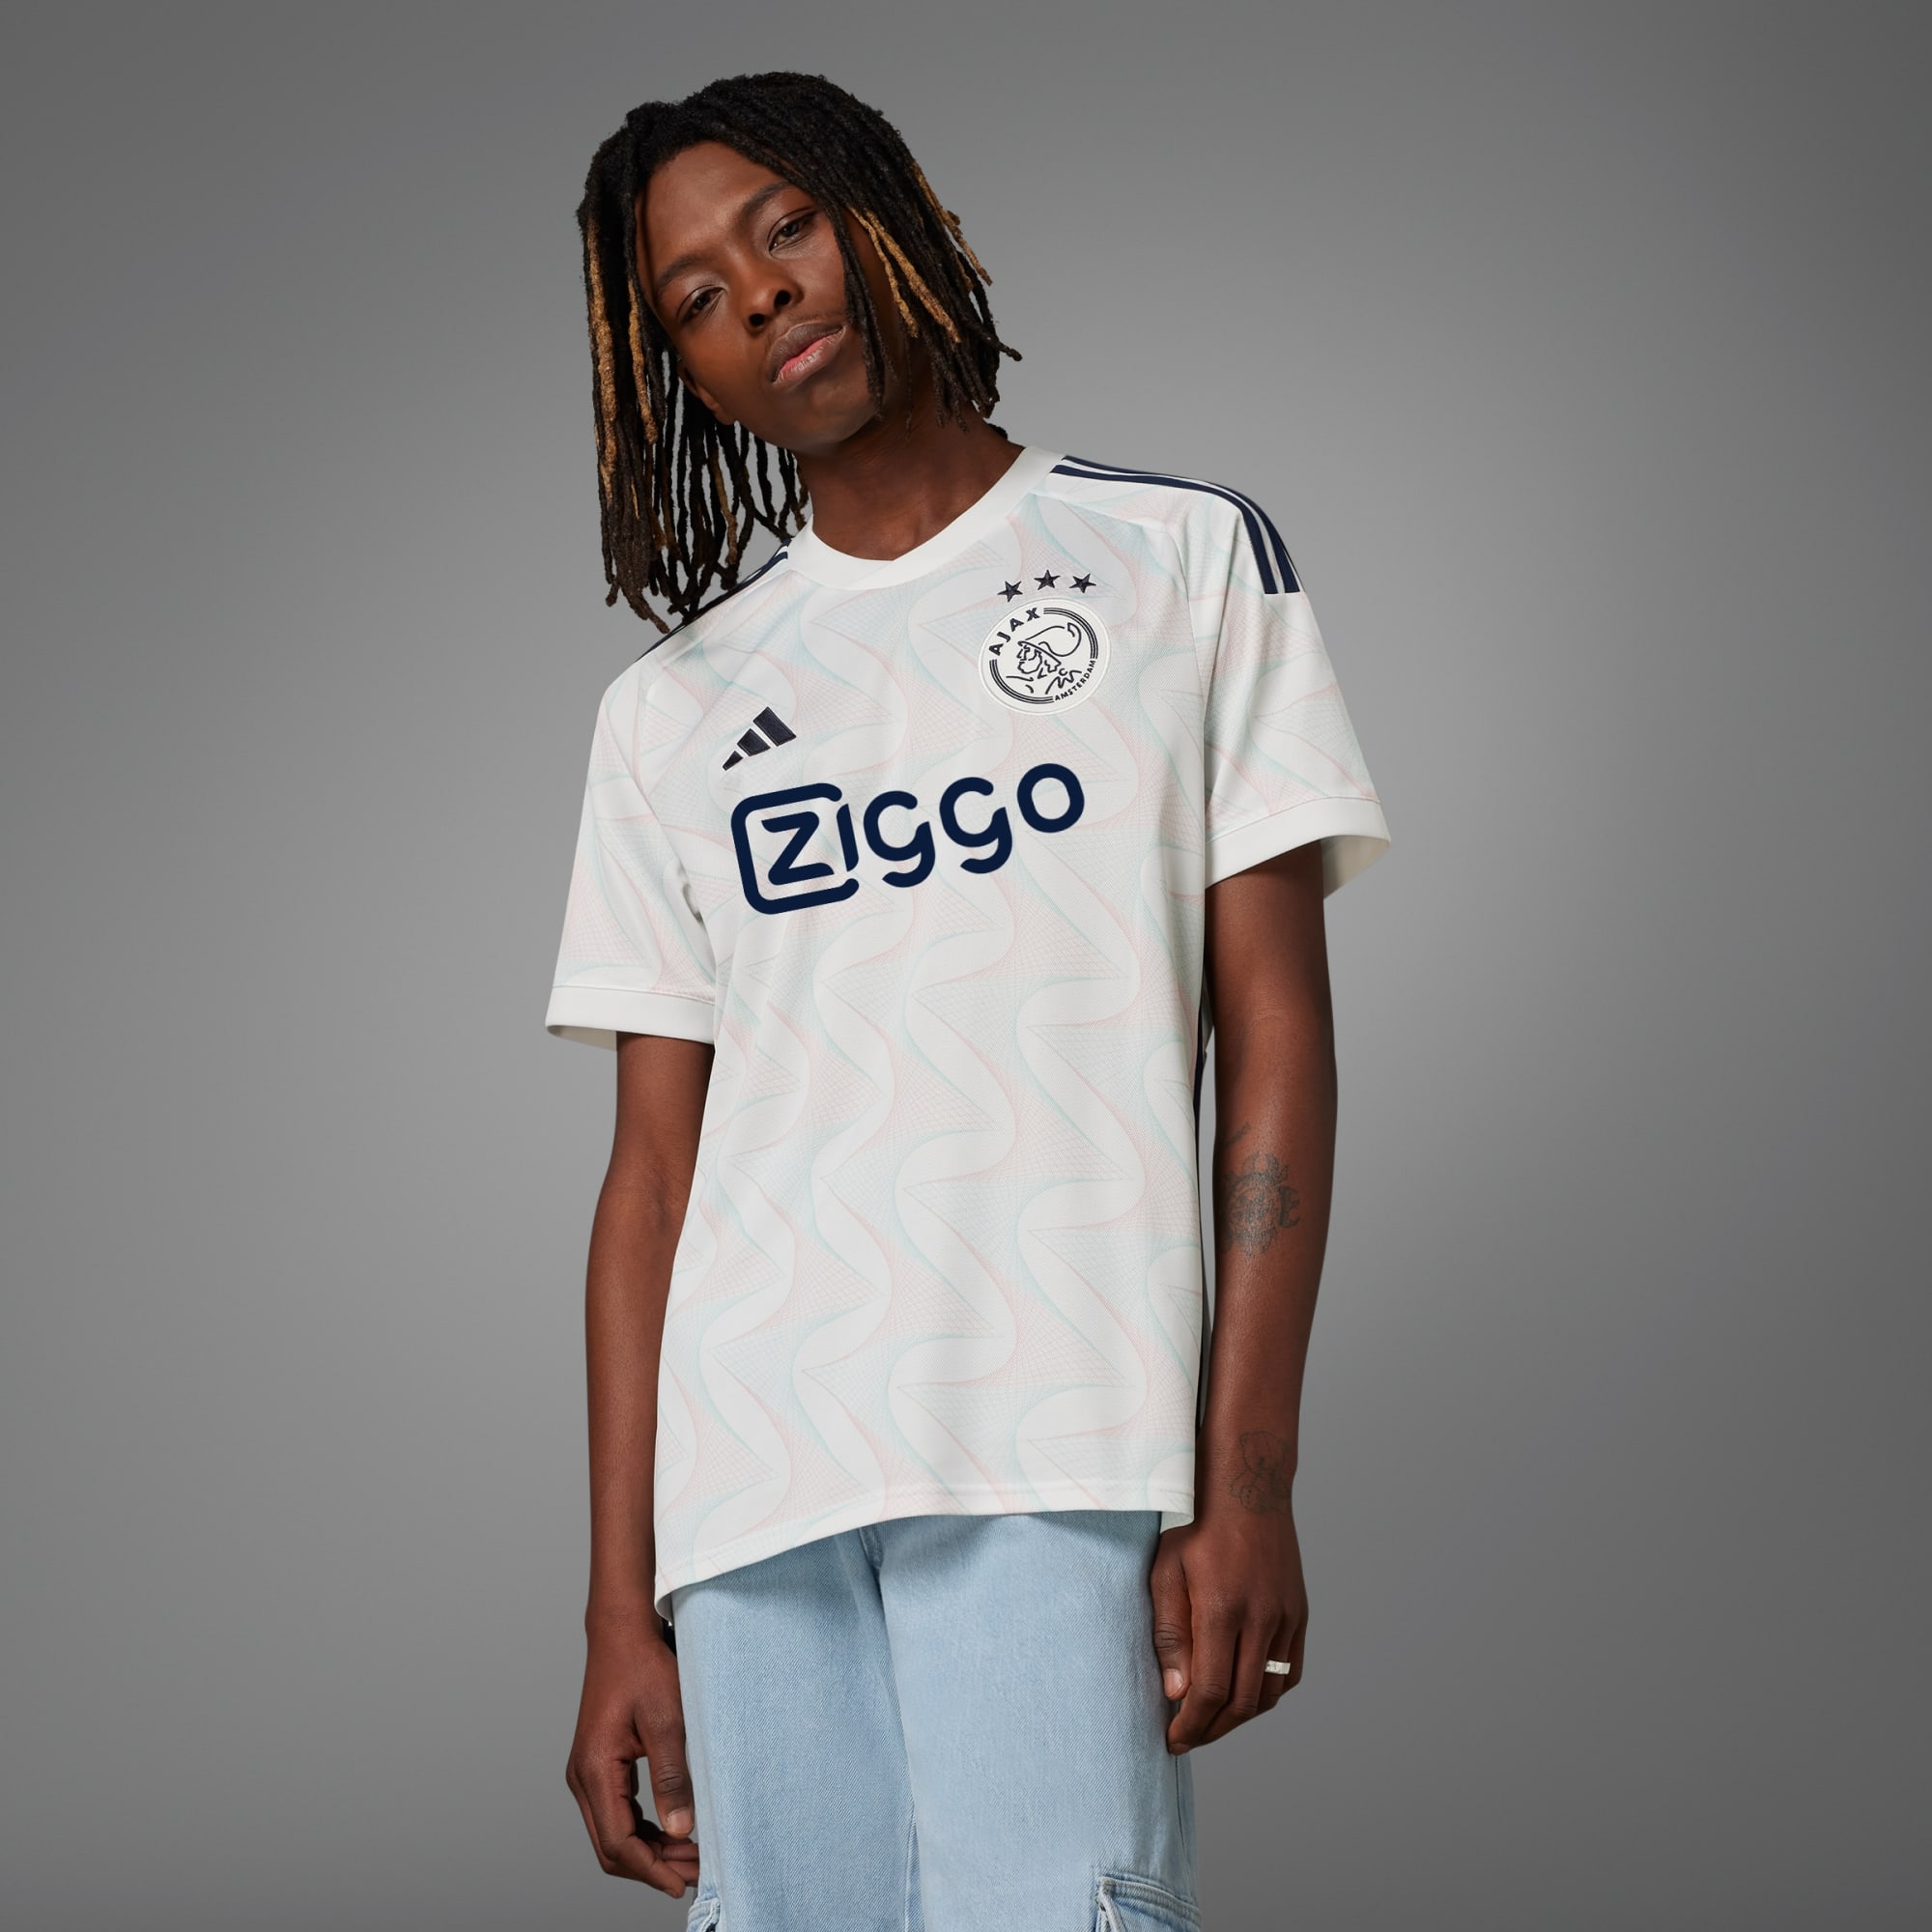 Ajax and adidas look back to the legendary '70s for an adidas